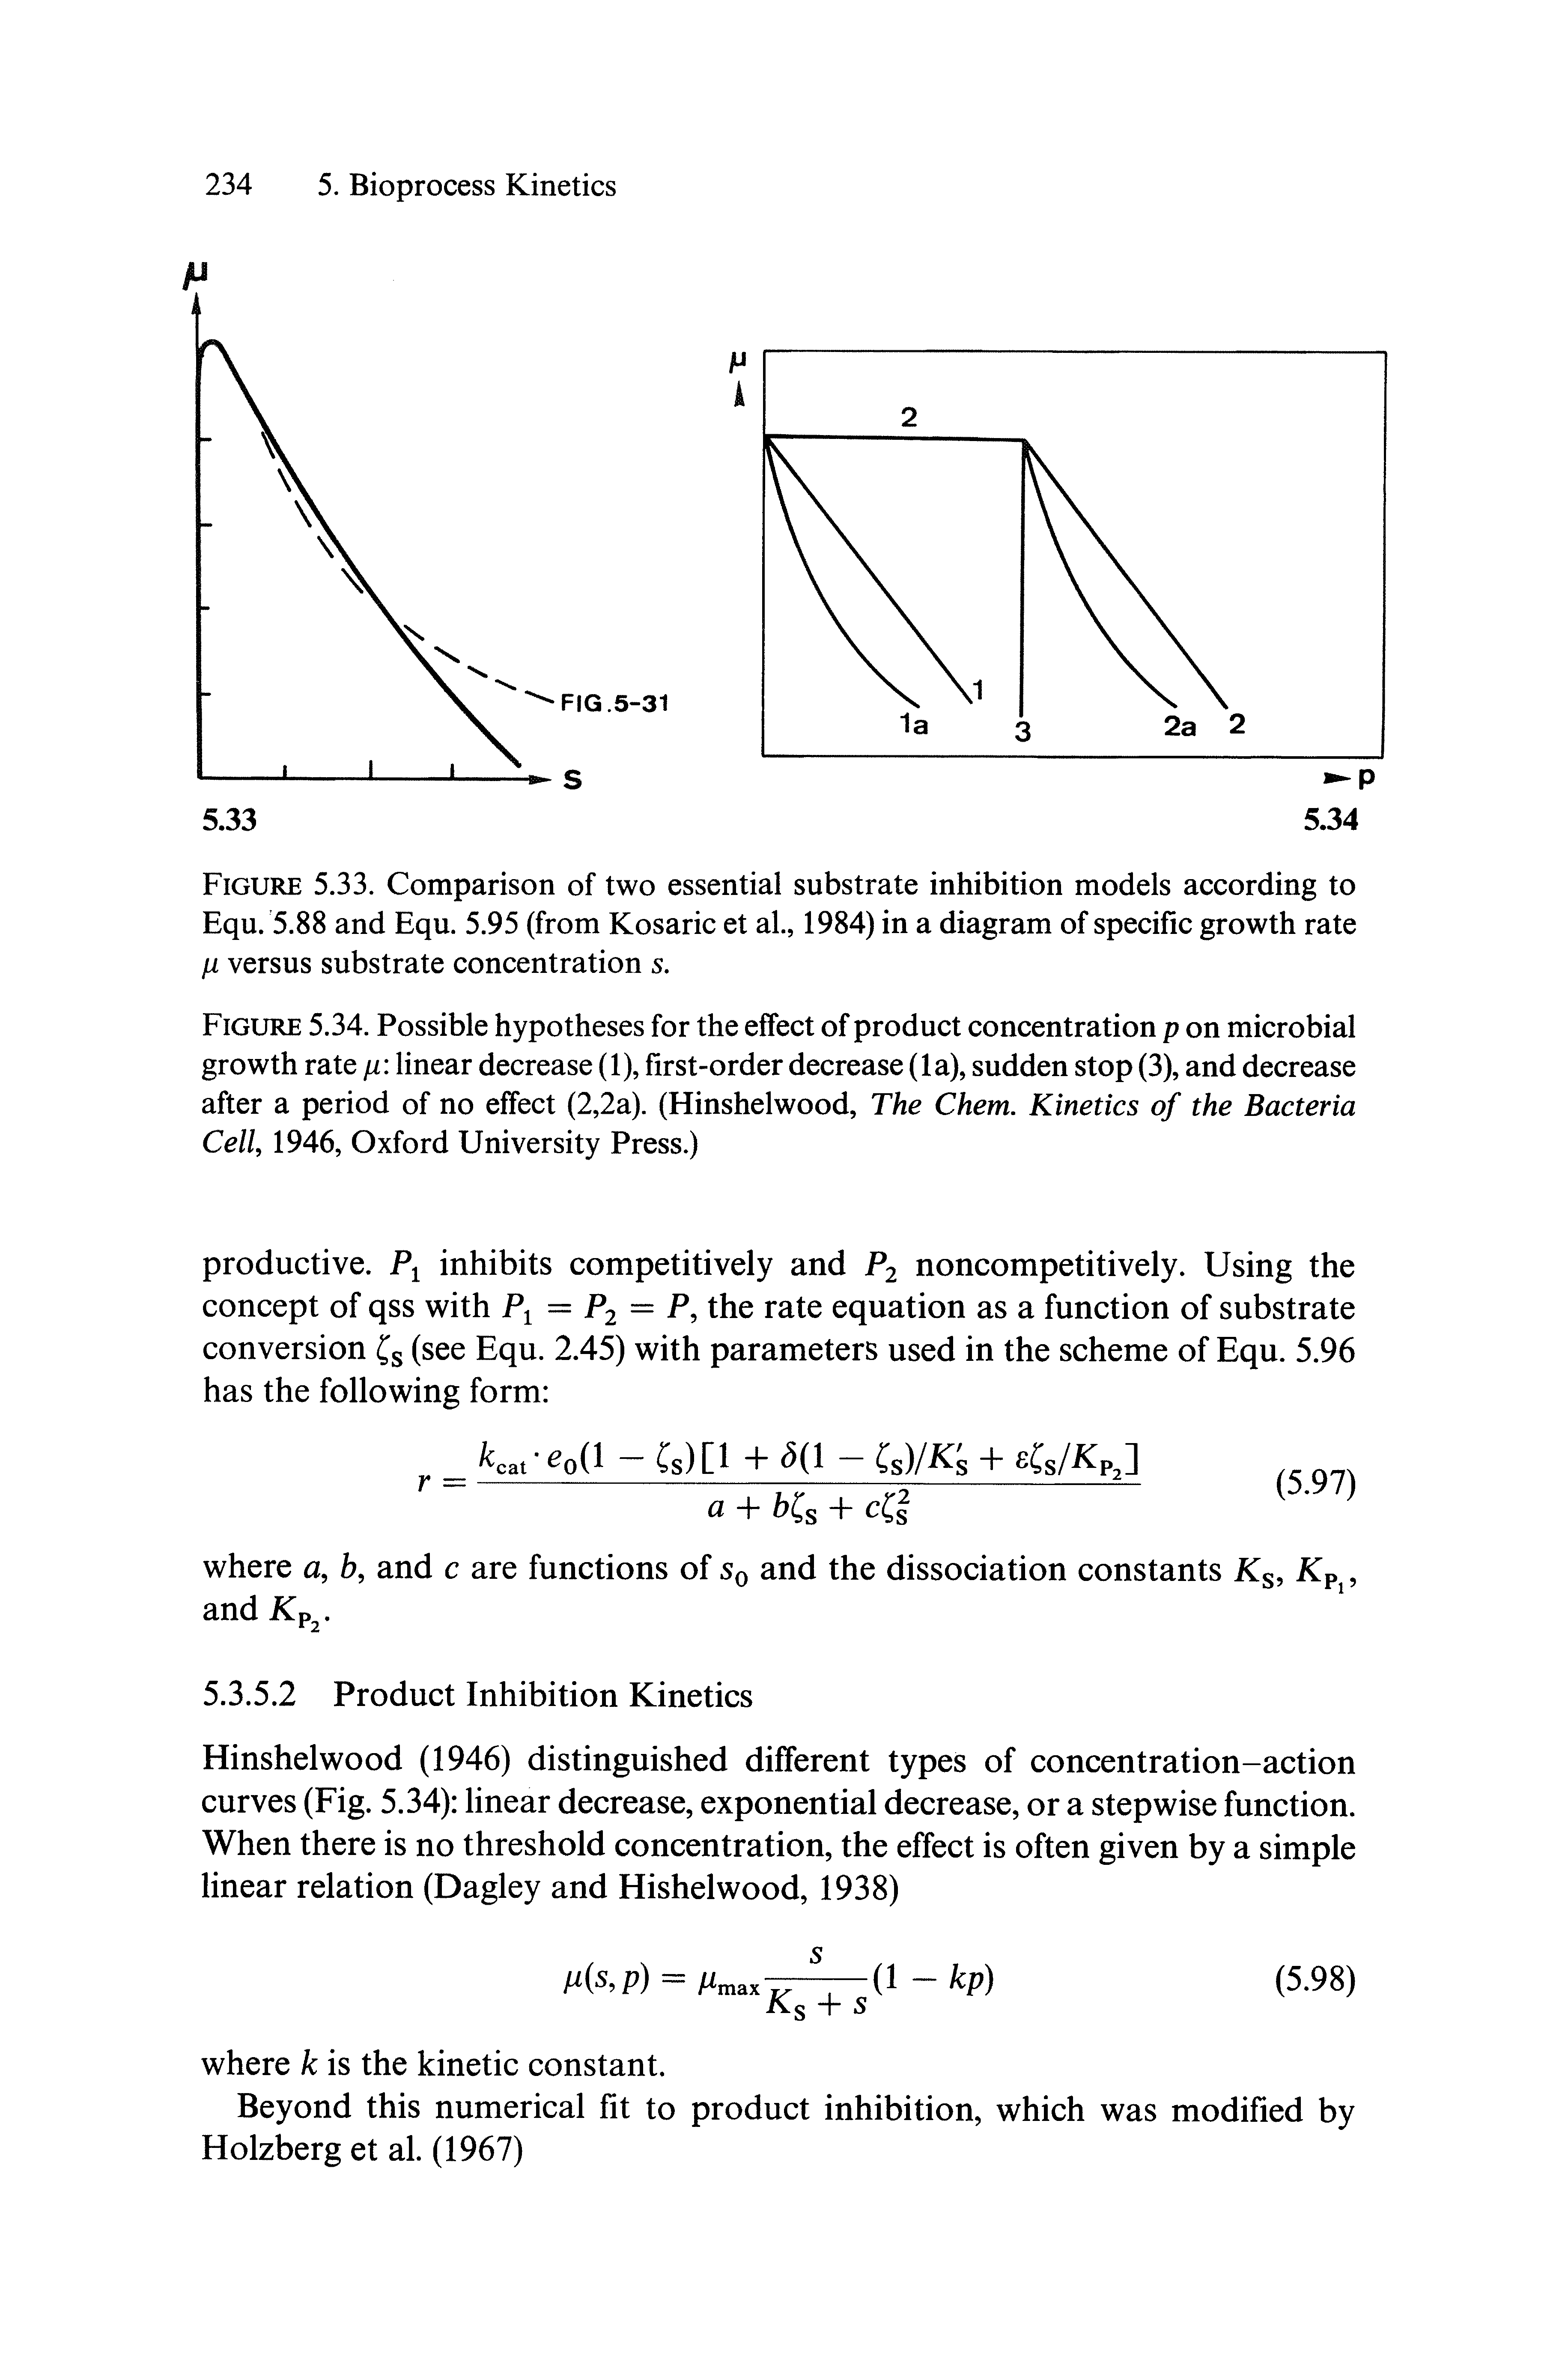 Figure 5.34. Possible hypotheses for the effect of product concentration p on microbial growth rate p linear decrease (1), first-order decrease (la), sudden stop (3), and decrease after a period of no effect (2,2a). (Hinshelwood, The Chem. Kinetics of the Bacteria Cell, 1946, Oxford University Press.)...